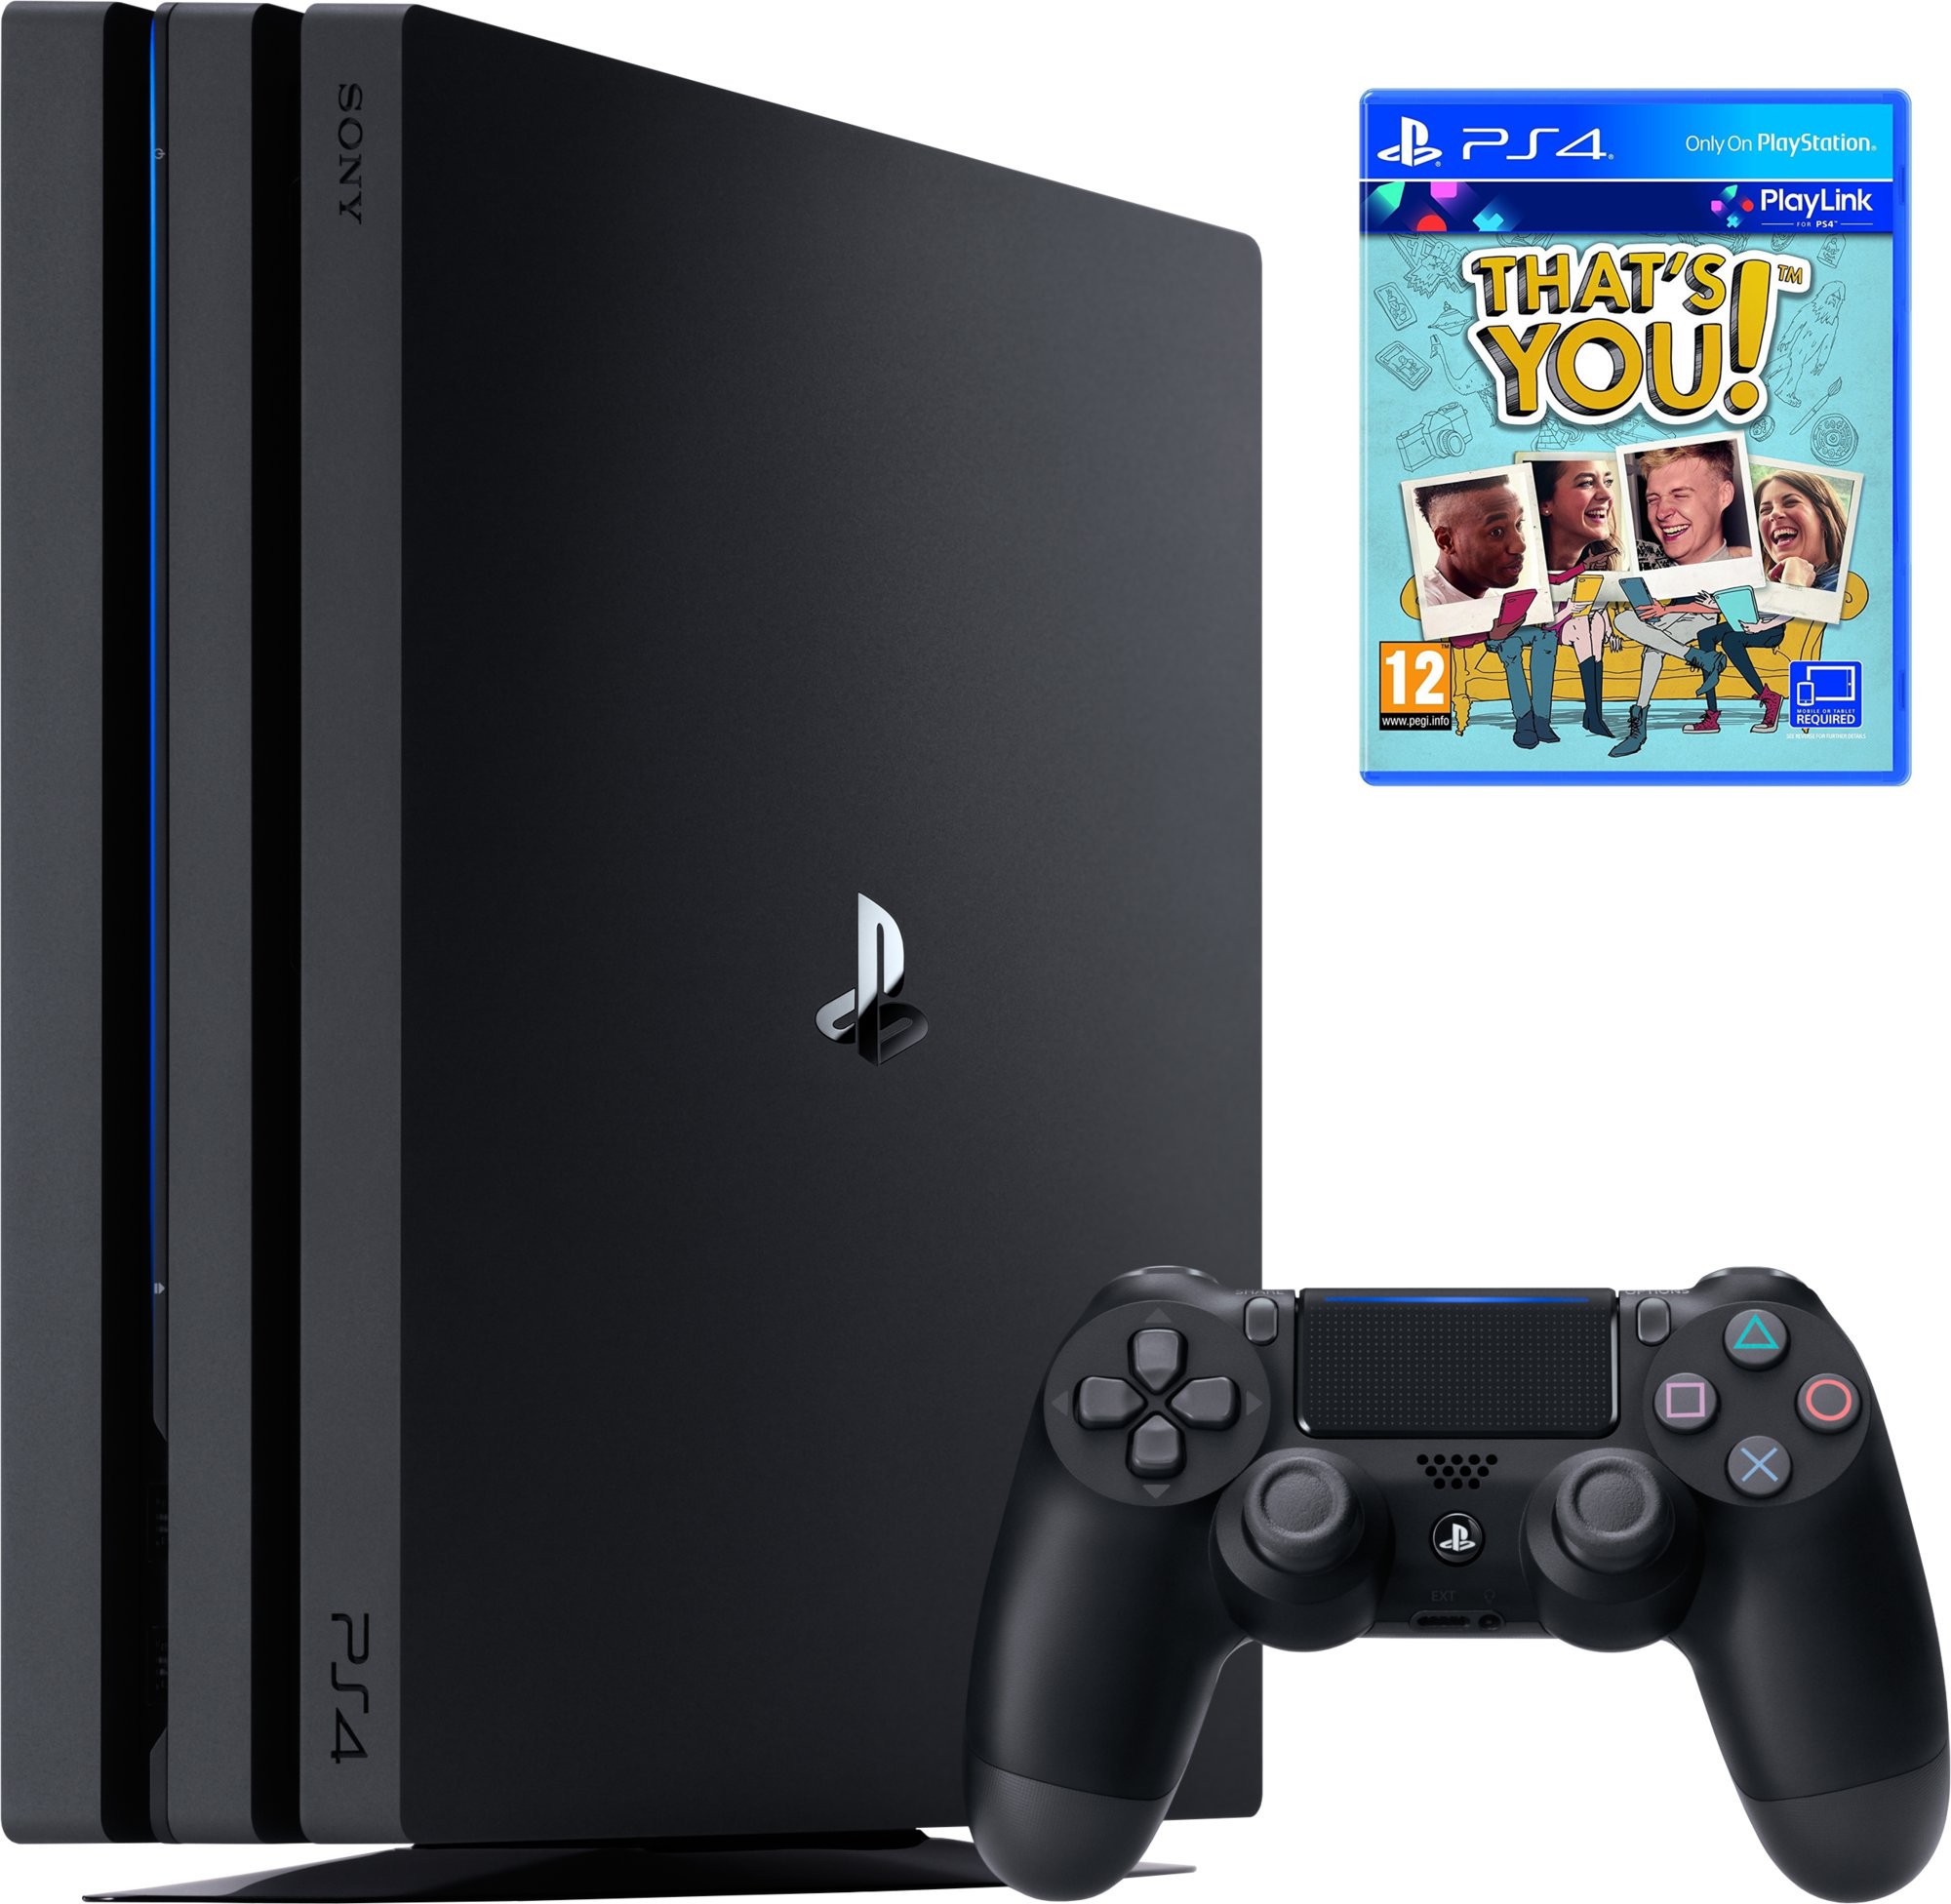 PS4 Pro - Playstation 4 Pro 1TB + That´s you! PS719953760